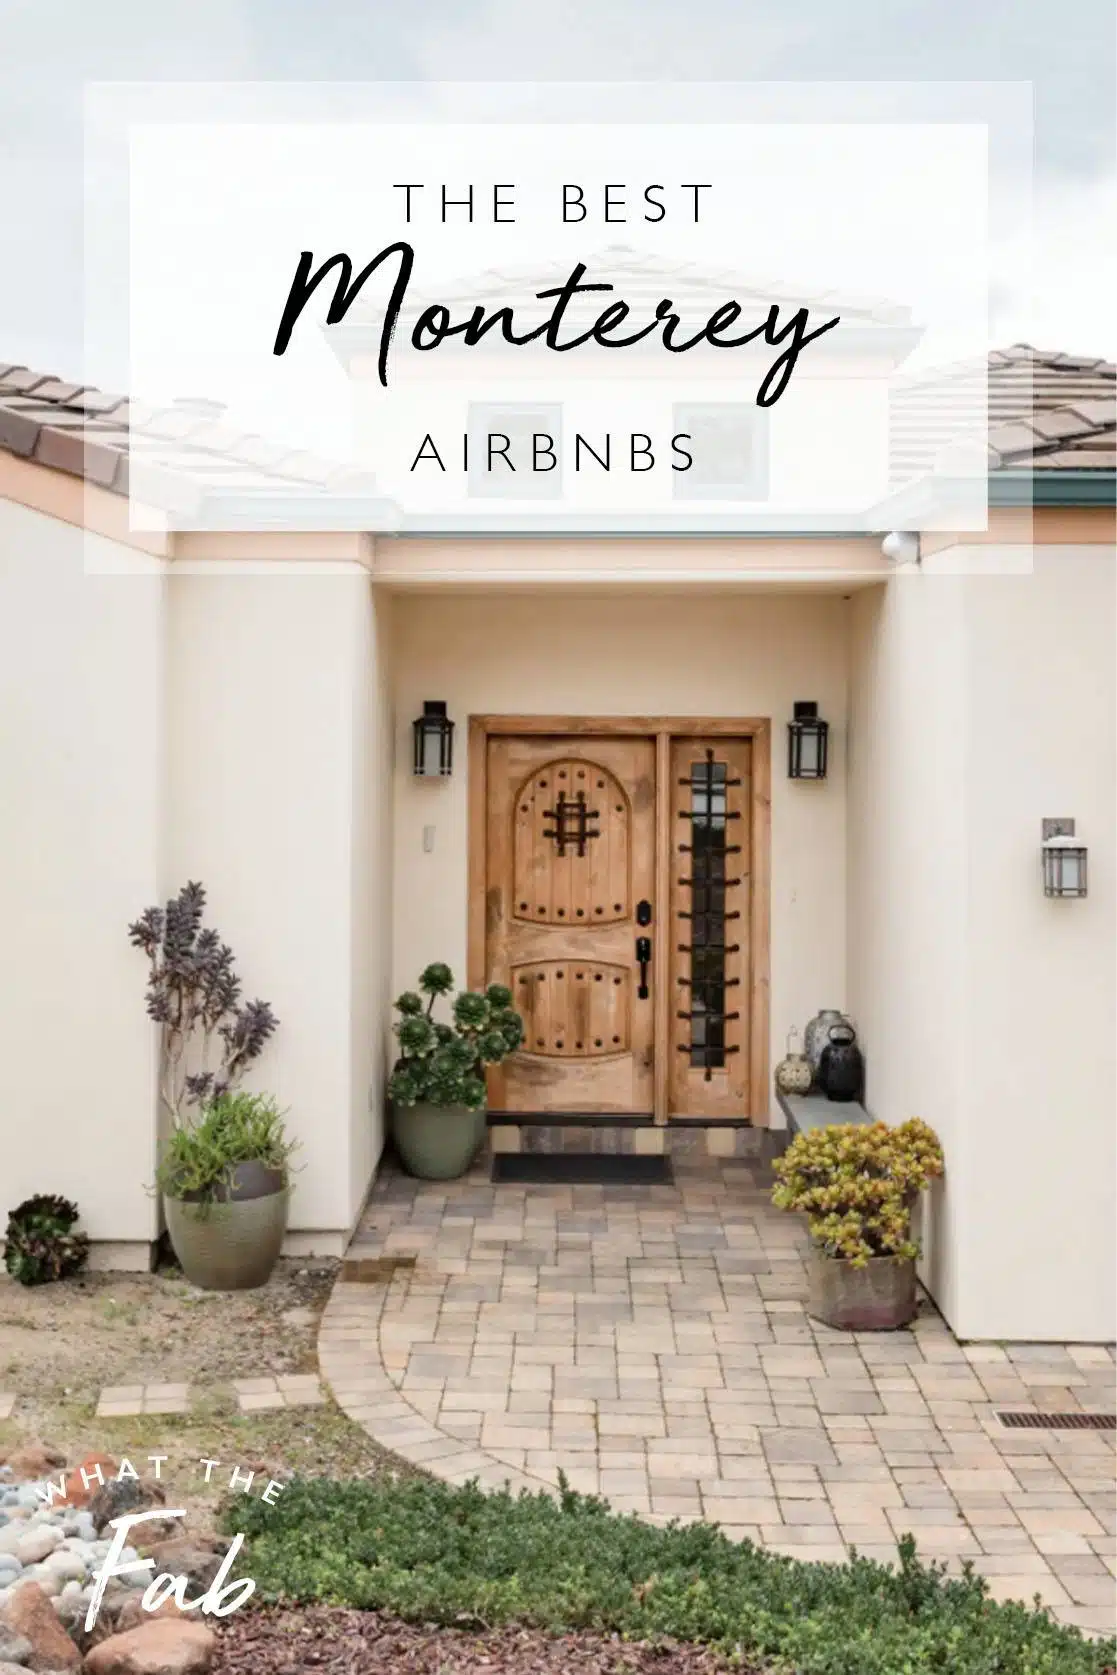 Airbnb Monterey guide, by Travel Blogger What The Fab